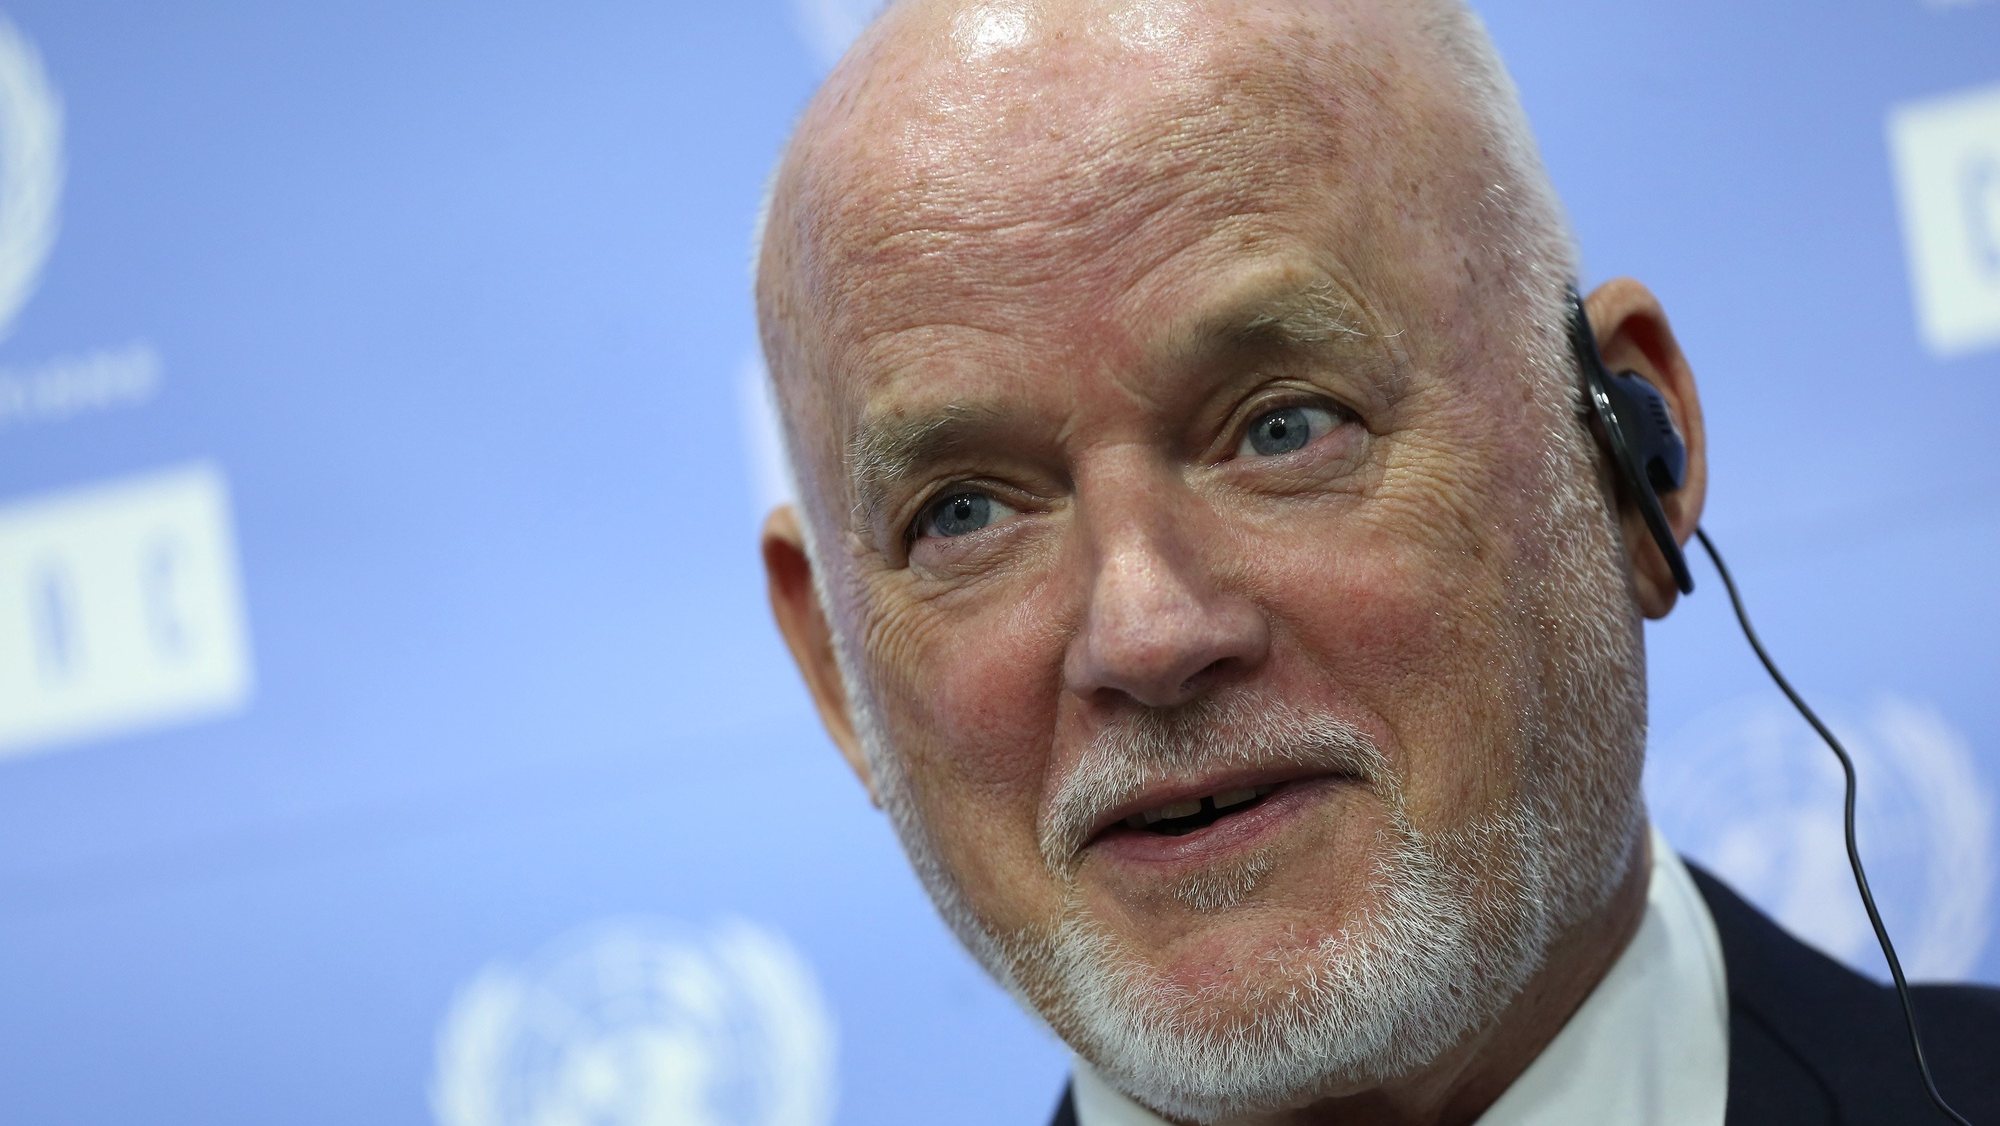 epa07761250 UN Special Envoy for the Oceans Peter Thomson delivers a press conference during a visit at the headquarters of the Economic Commission for Latin America and the Caribbean (ECLAC), in Santiago, Chile, 07 August 2019.  EPA/Elvis Gonzalez